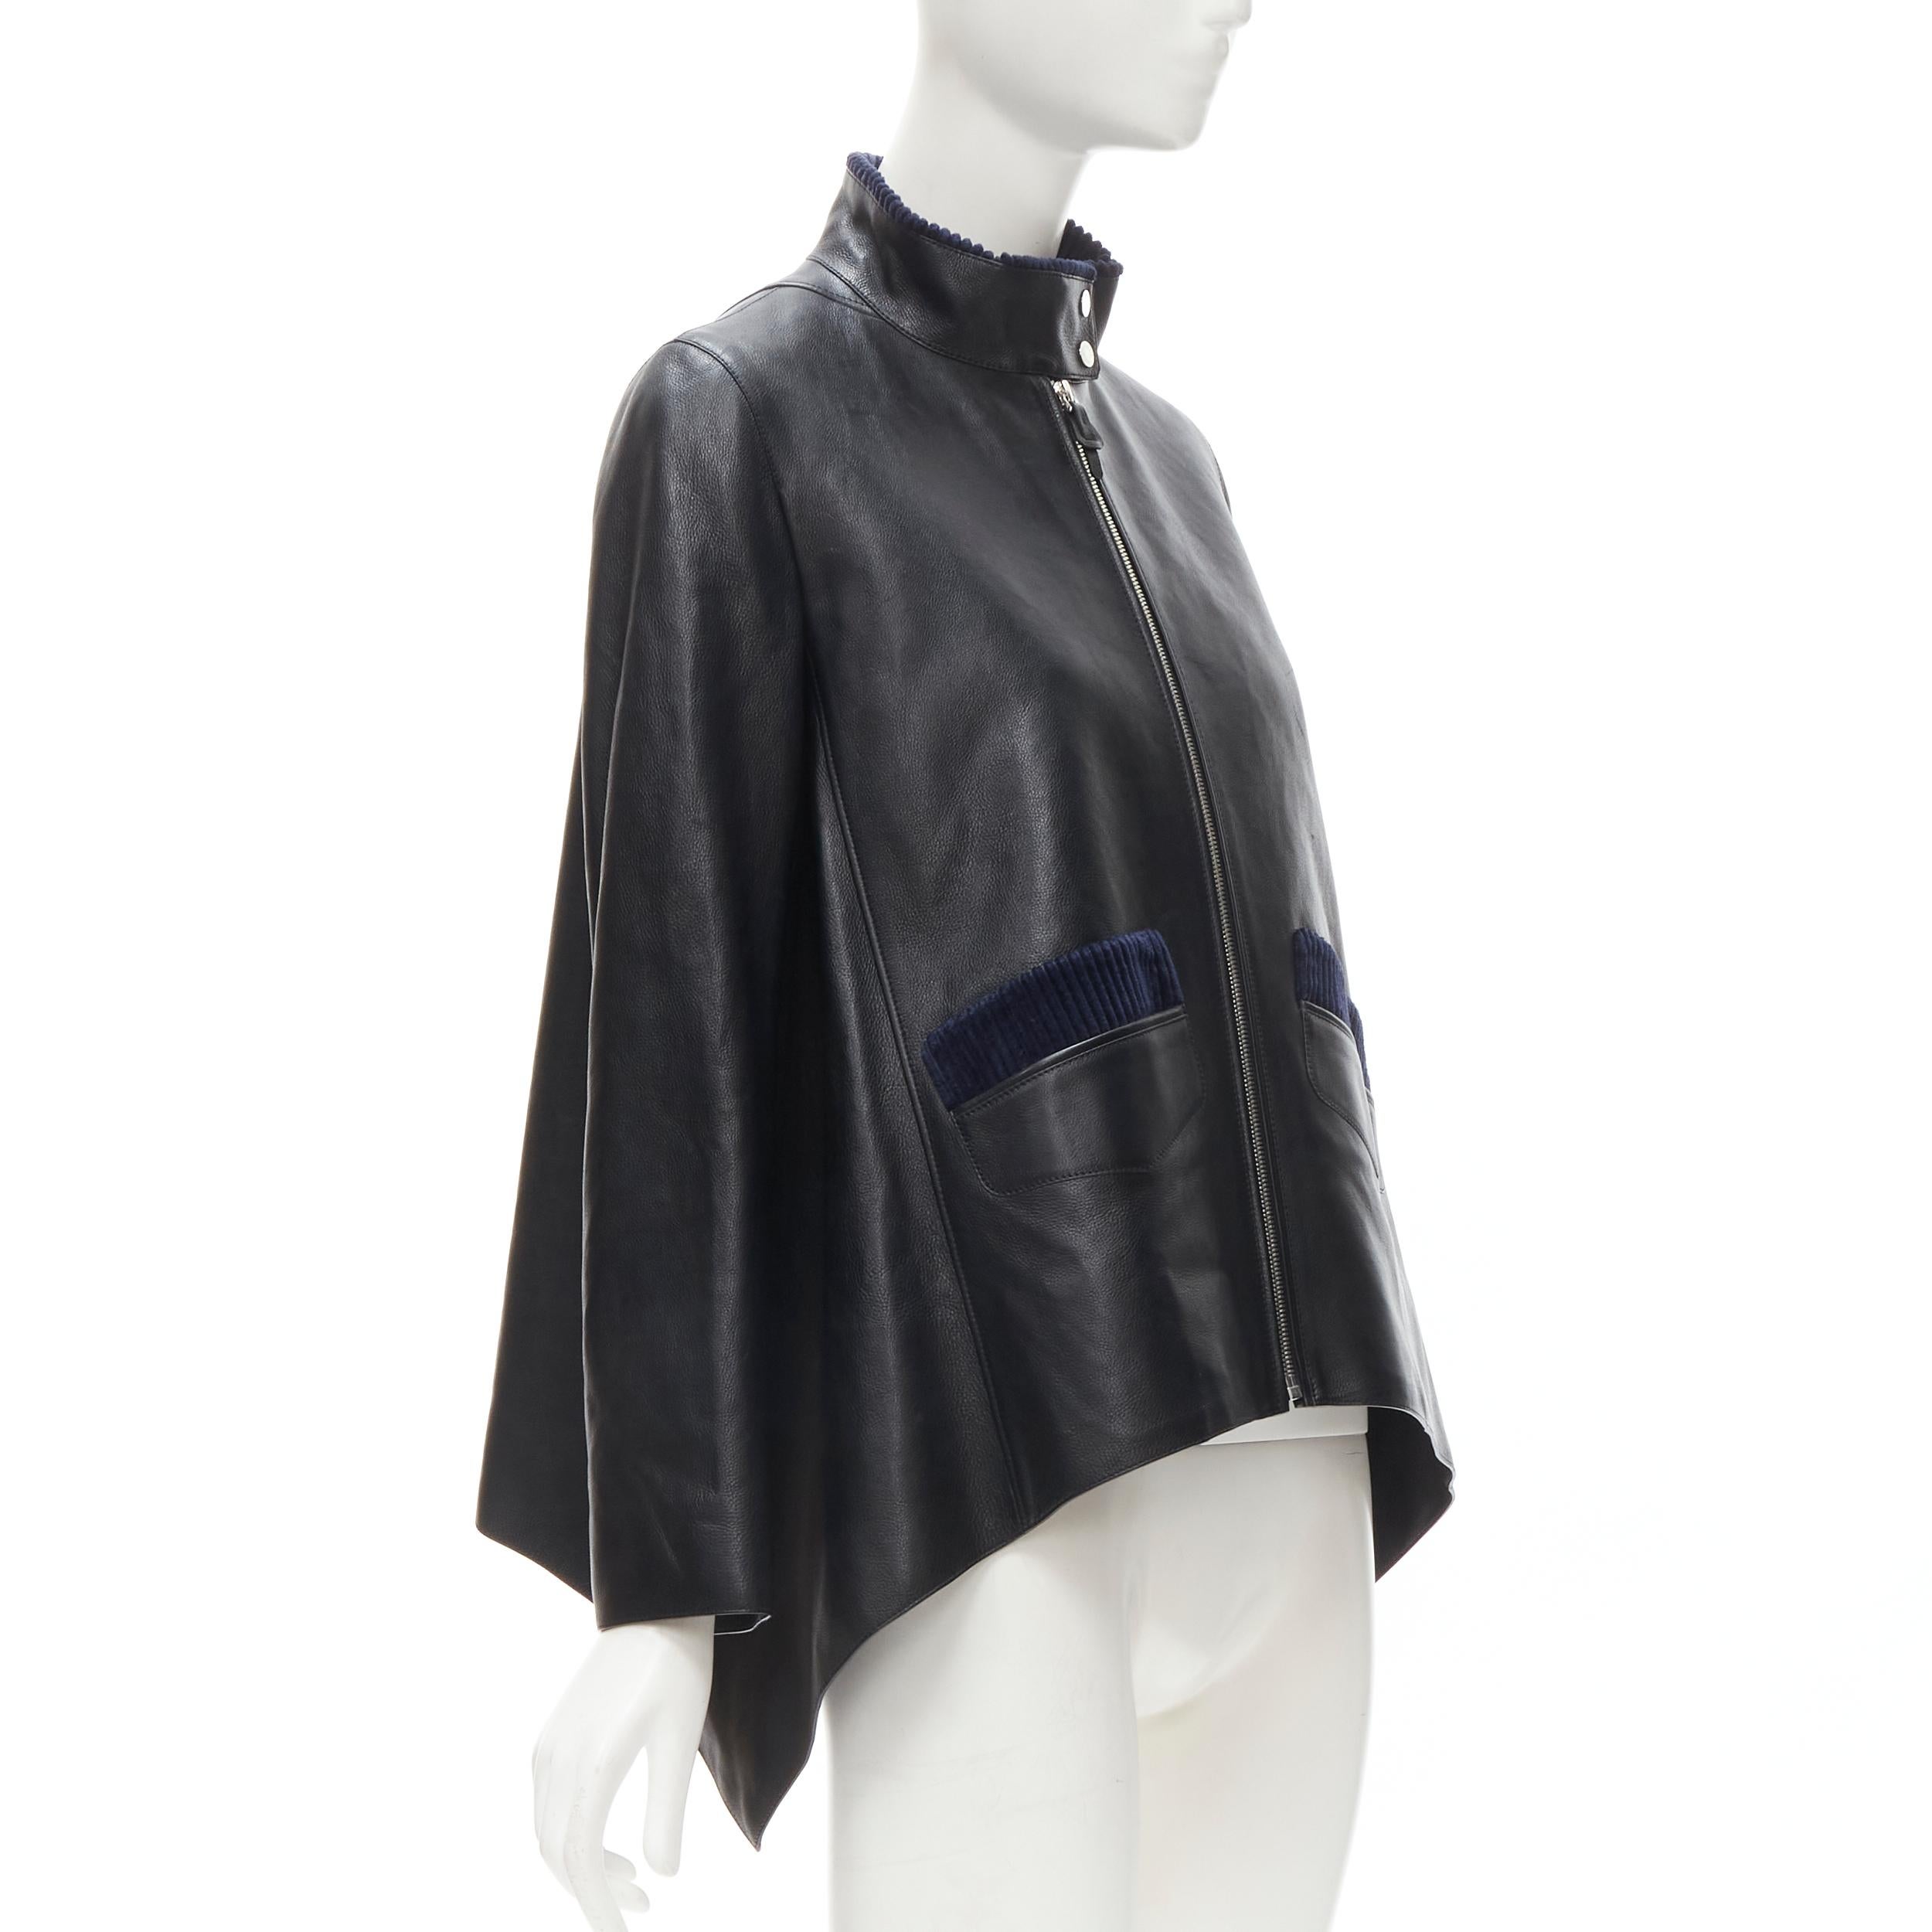 HERMES black calfskin leather navy corduroy trim cape flared leather jacket FR36
Brand: Hermes
Material: Leather
Color: Black
Pattern: Solid
Closure: Zip
Extra Detail: Black calfskin leather. Navy corduroy trimming at collar and at pockets.